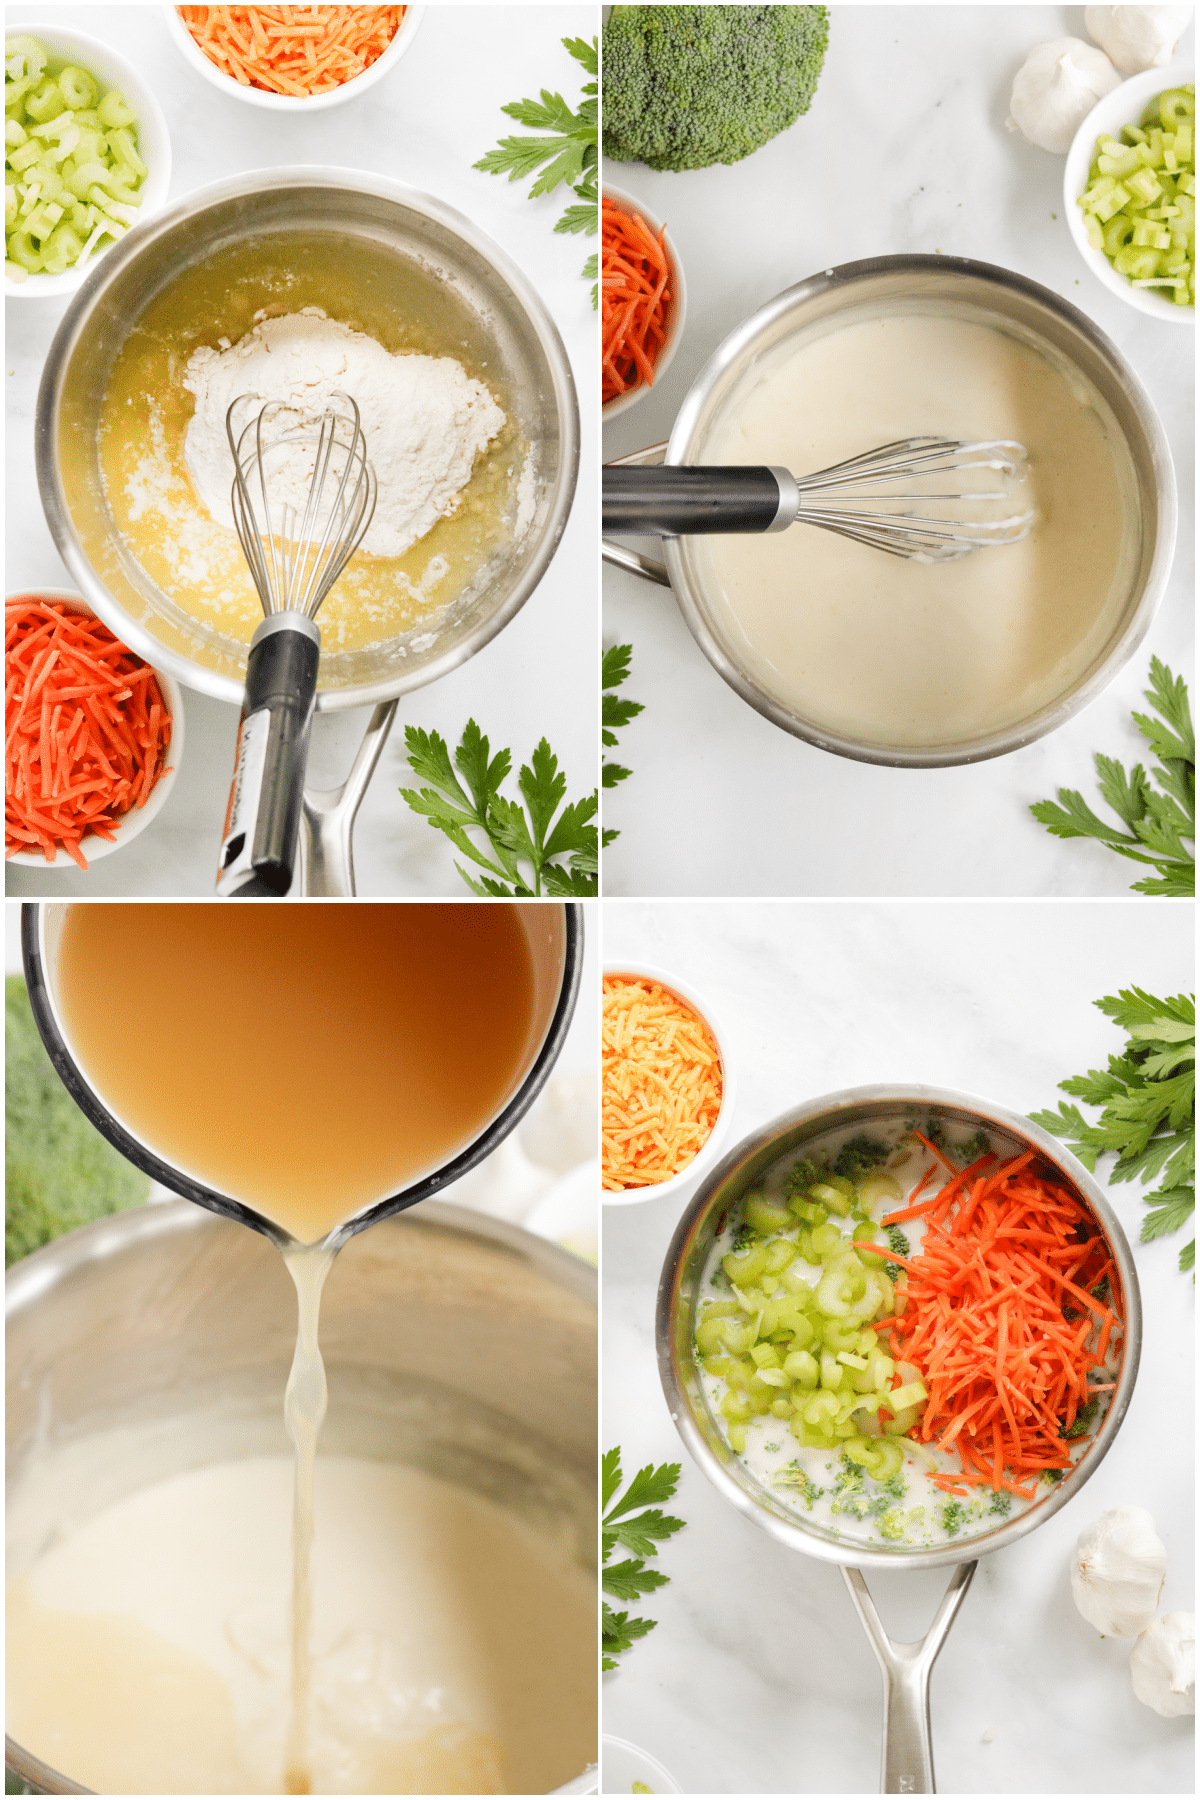 Four image collage showing how to make dairy free soup: Whisk flour and melted butter into a roux, add milk, add broth, add broccoli, shredded carrots, celery, and cheese.